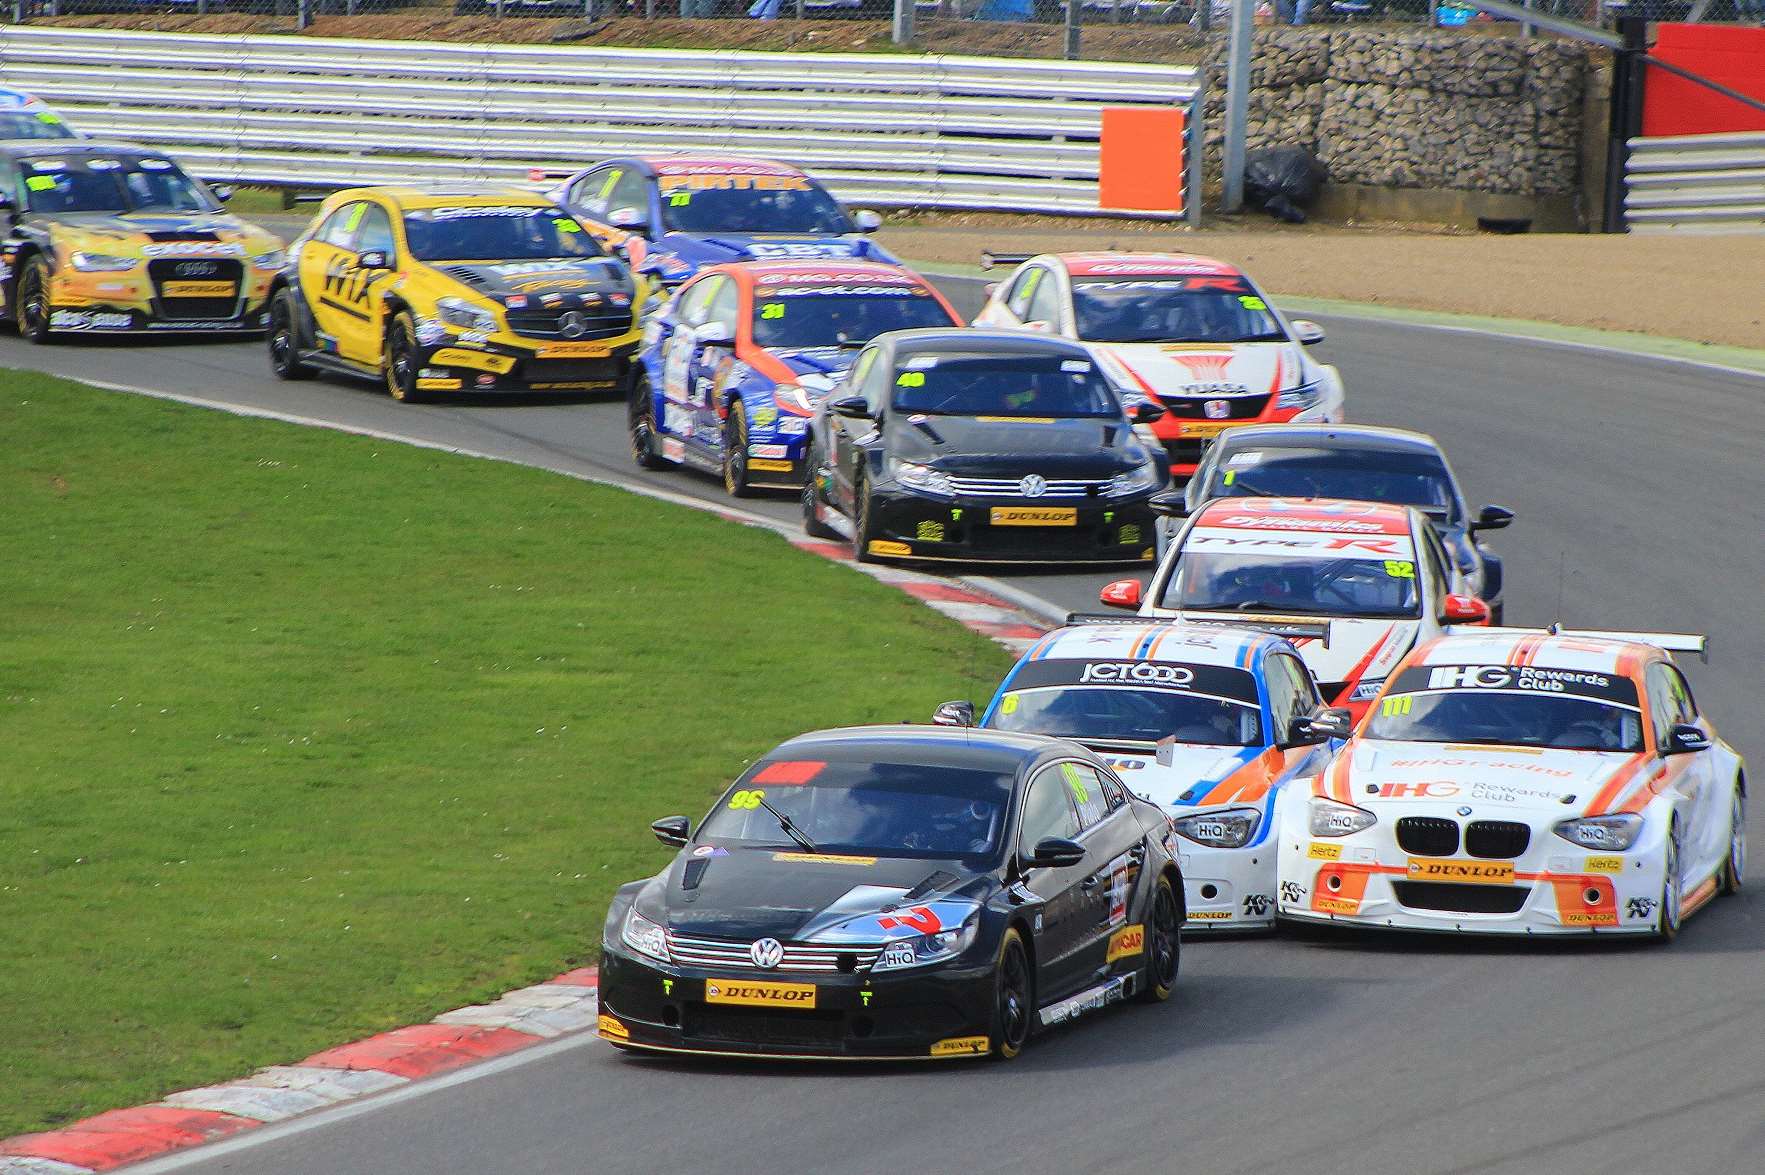 Jason Plato leads the field at the start of race two before suffering a puncture. Picture: Joe Wright